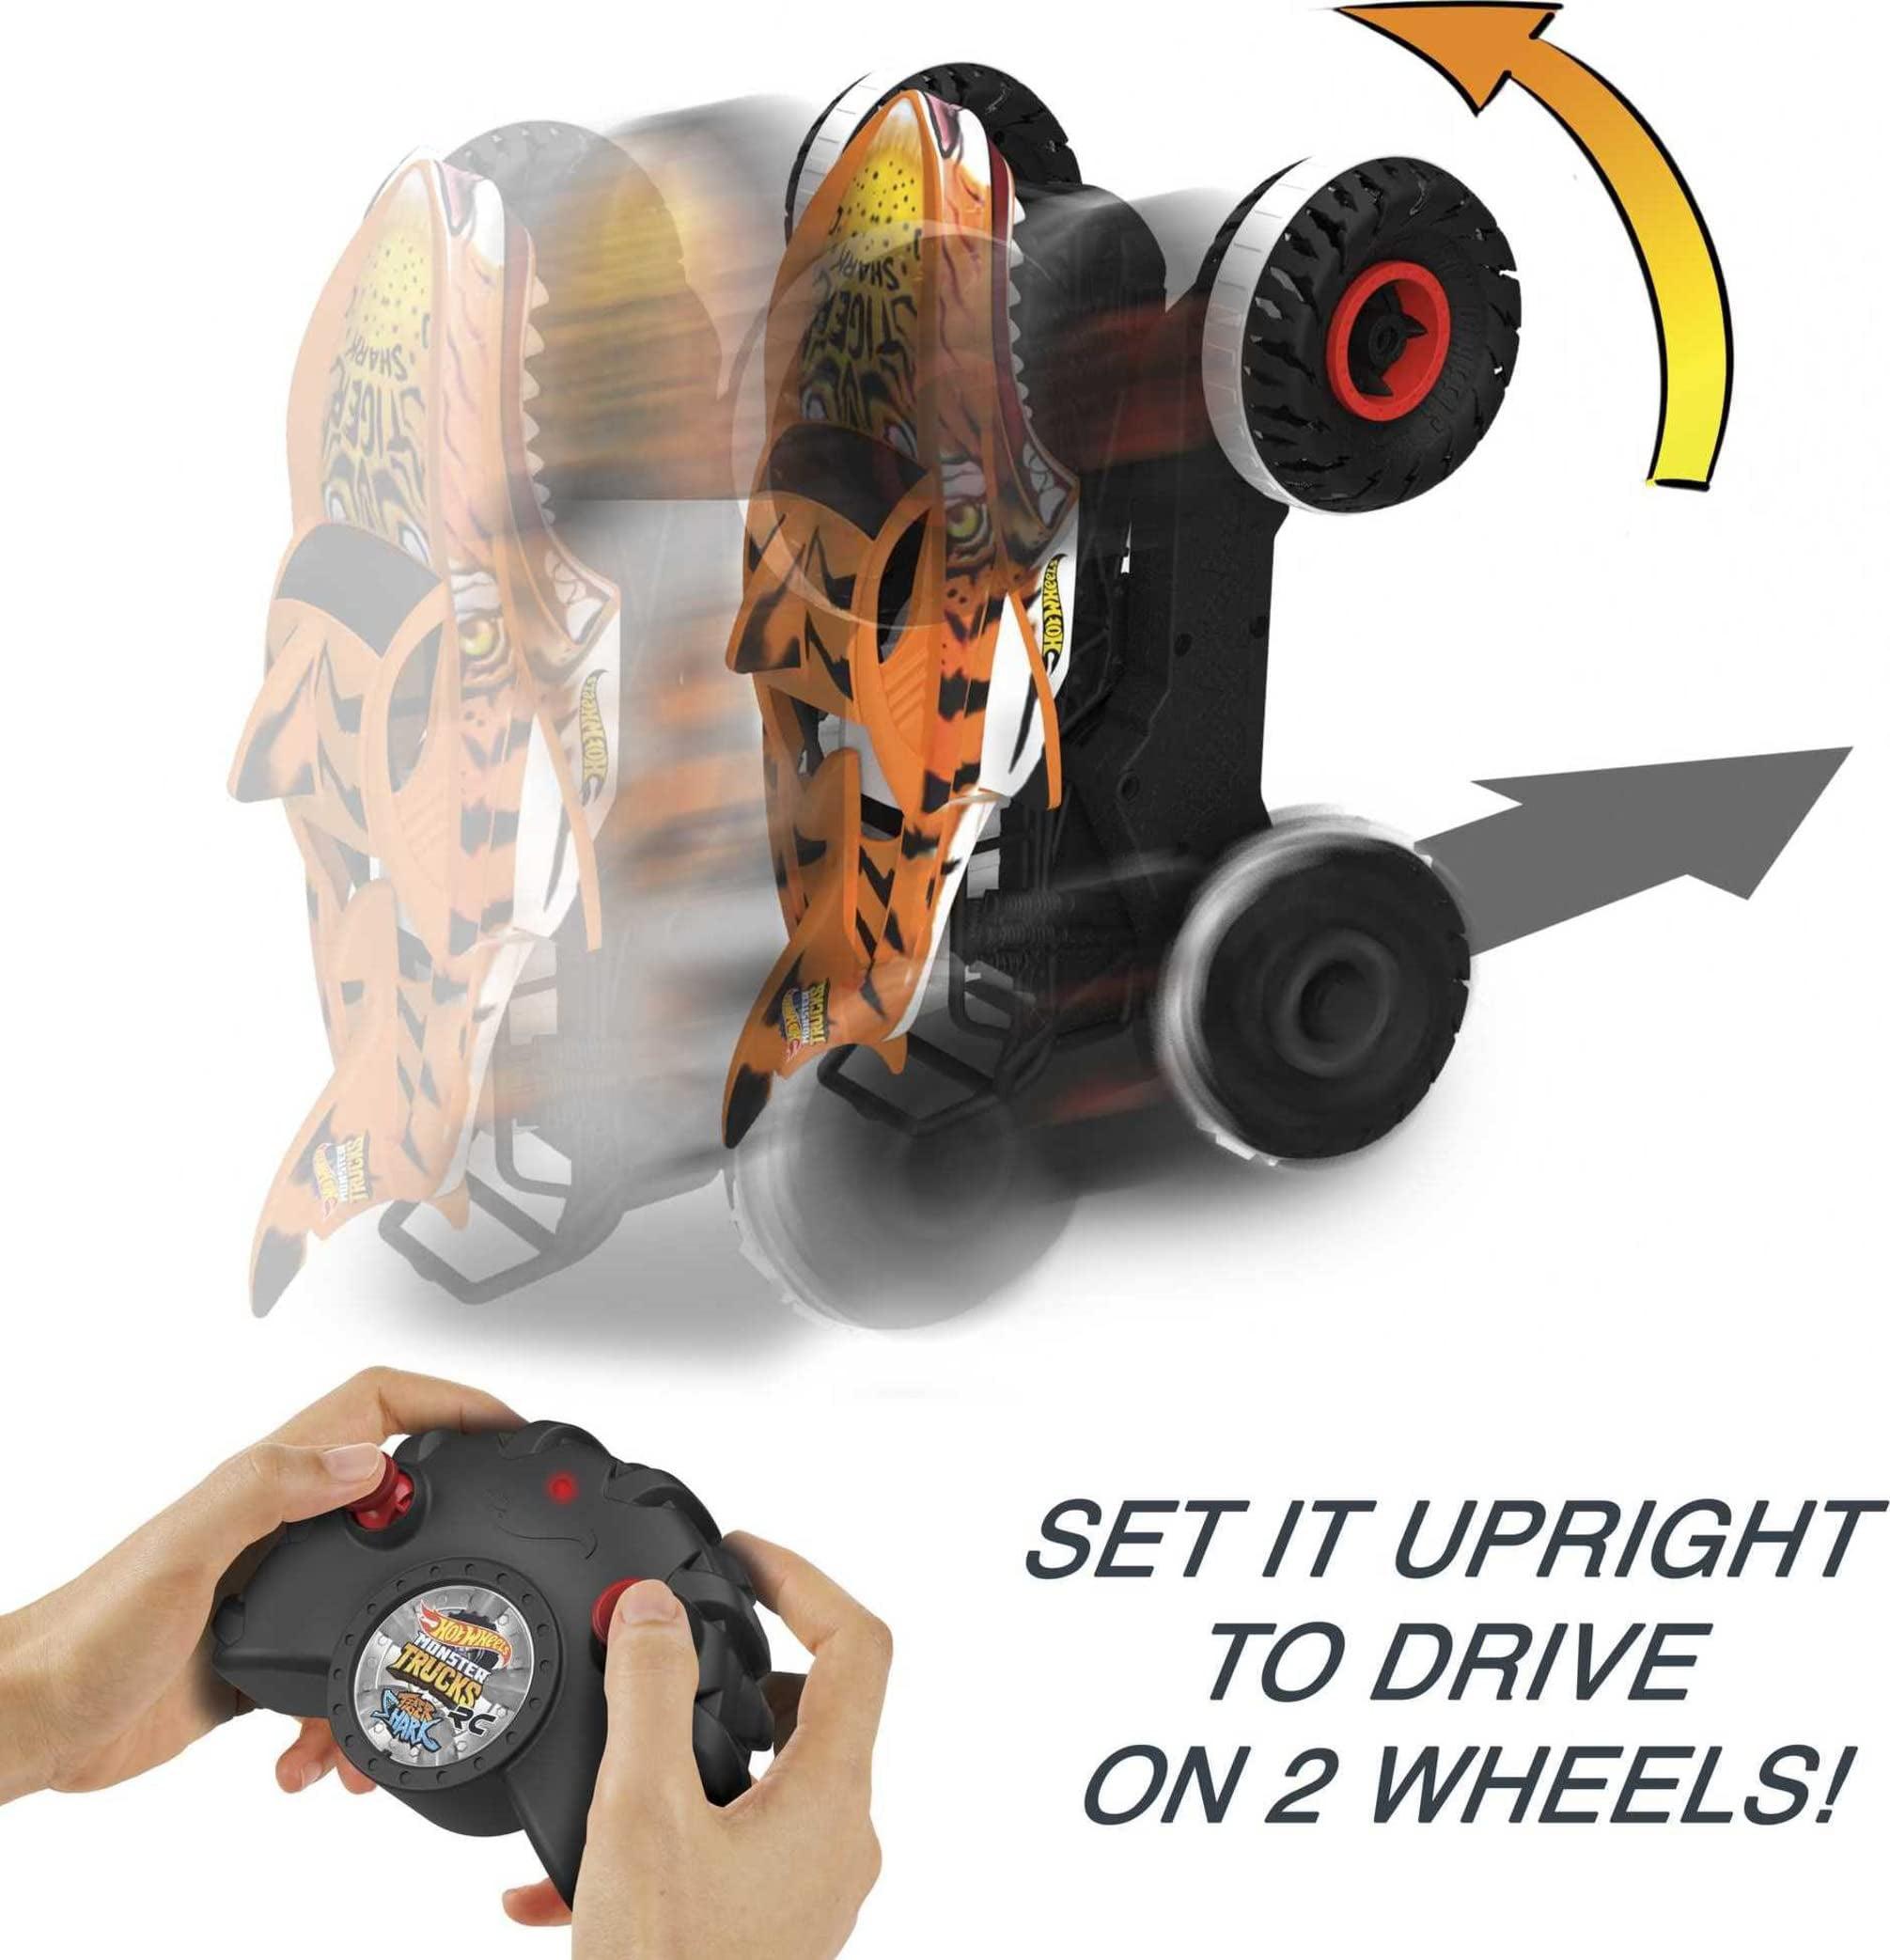 Hot Wheels Monster Trucks Unstoppable Tiger Shark Rc Vehicle:  Buttons that light up for easy use in low-light situations